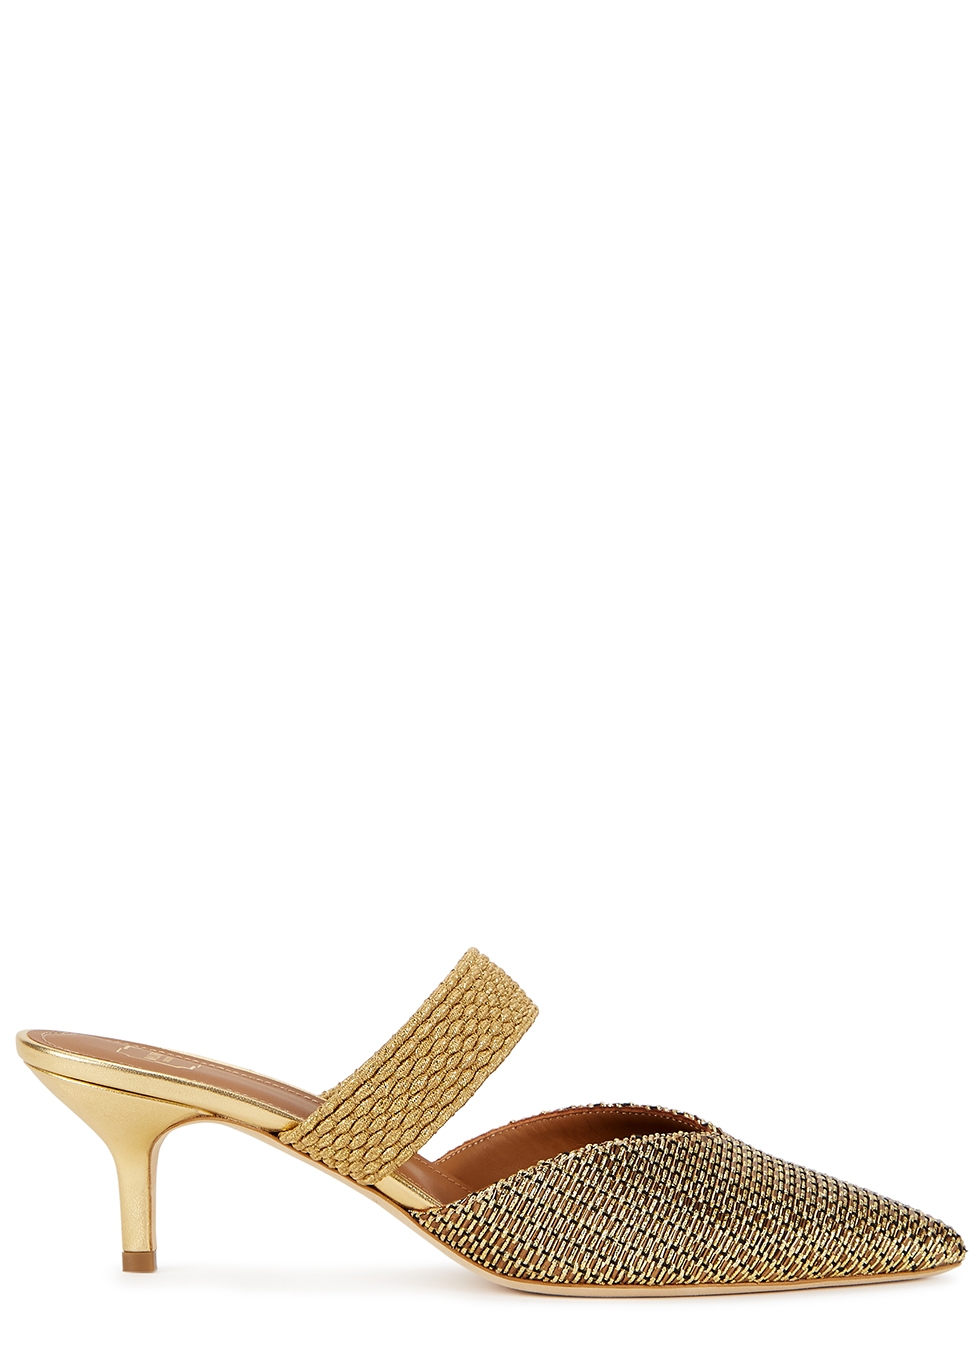 Malone Souliers Maisie 45 gold leather 